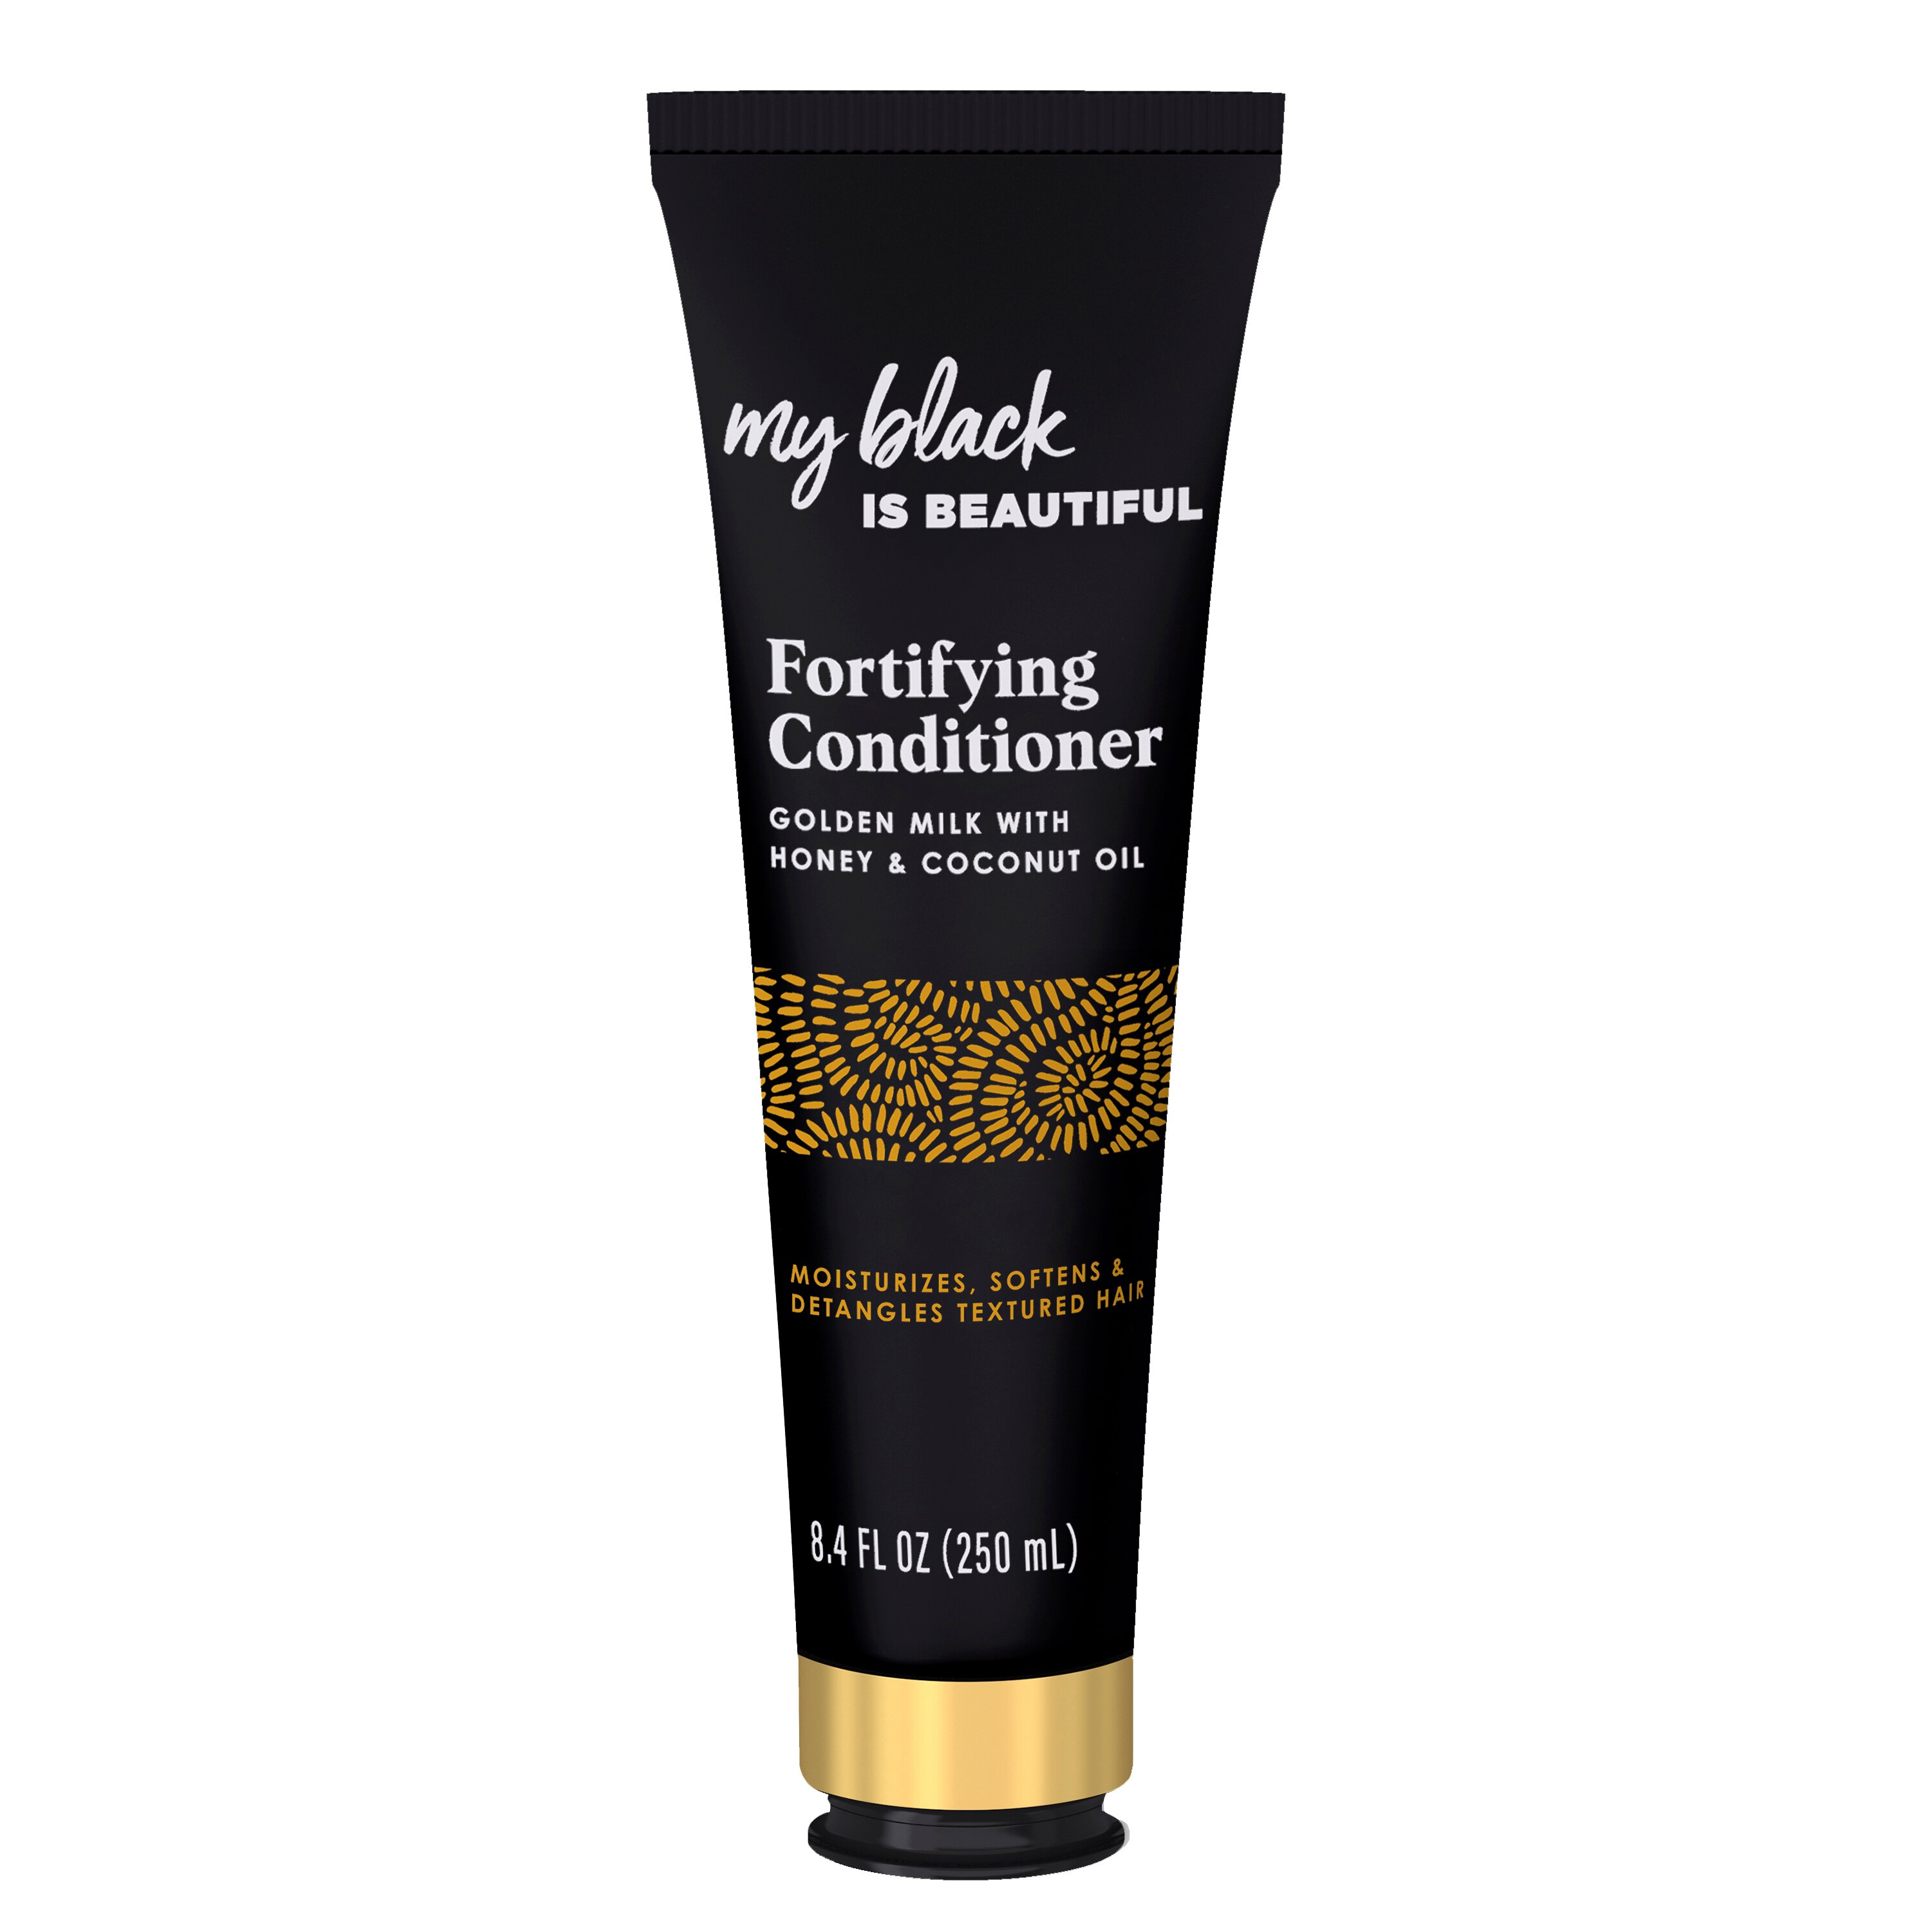 My Black is Beautiful Sulfate Free Fortifying Conditioner for Curly and Coily Hair, 8.4 OZ